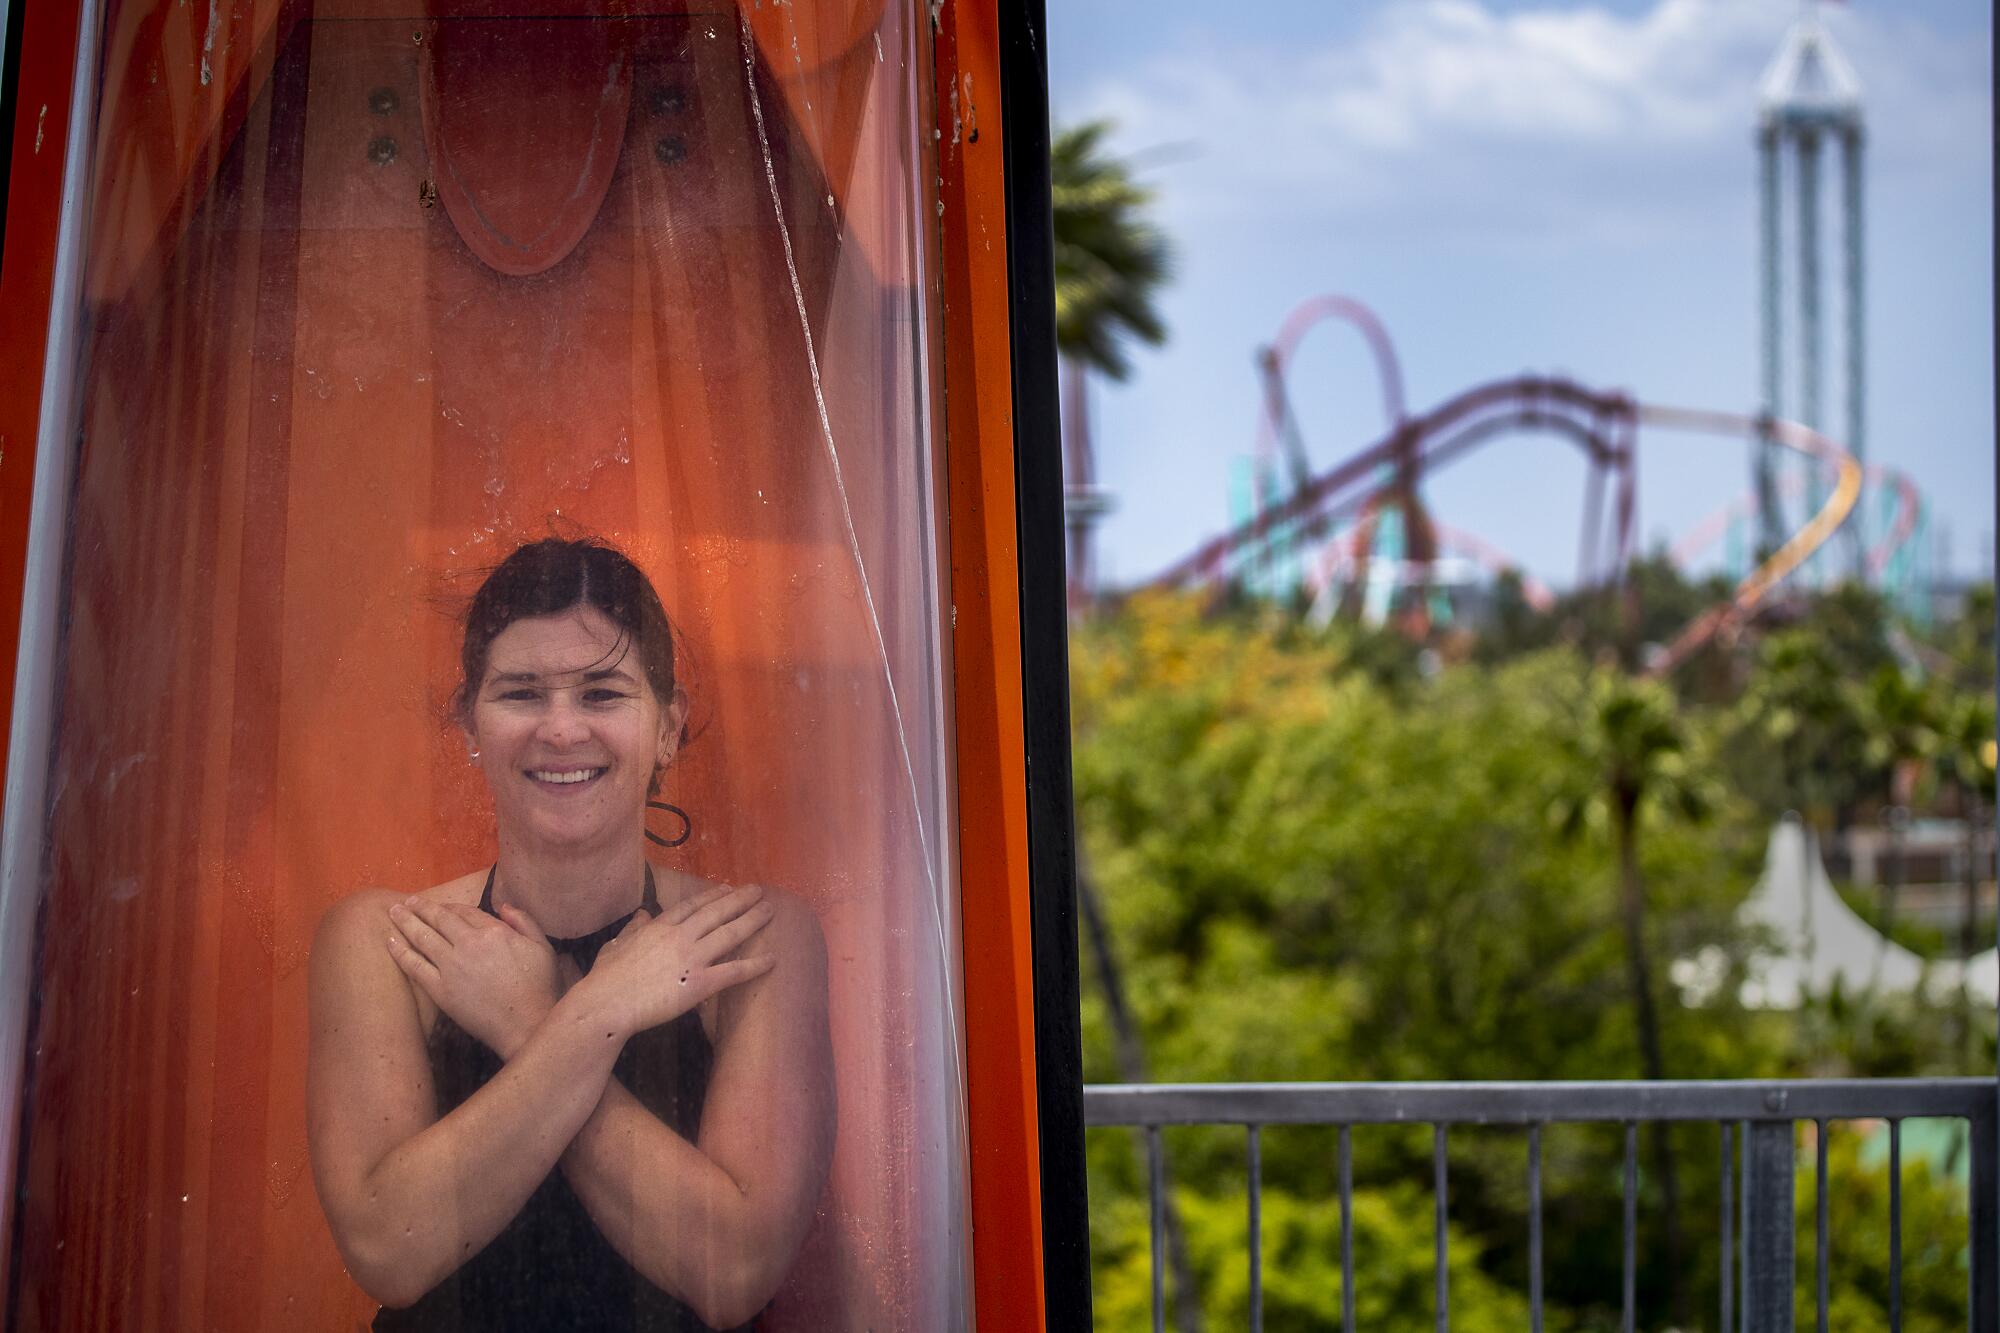  A woman prepares to be dropped into the water at Shore Break water slides.